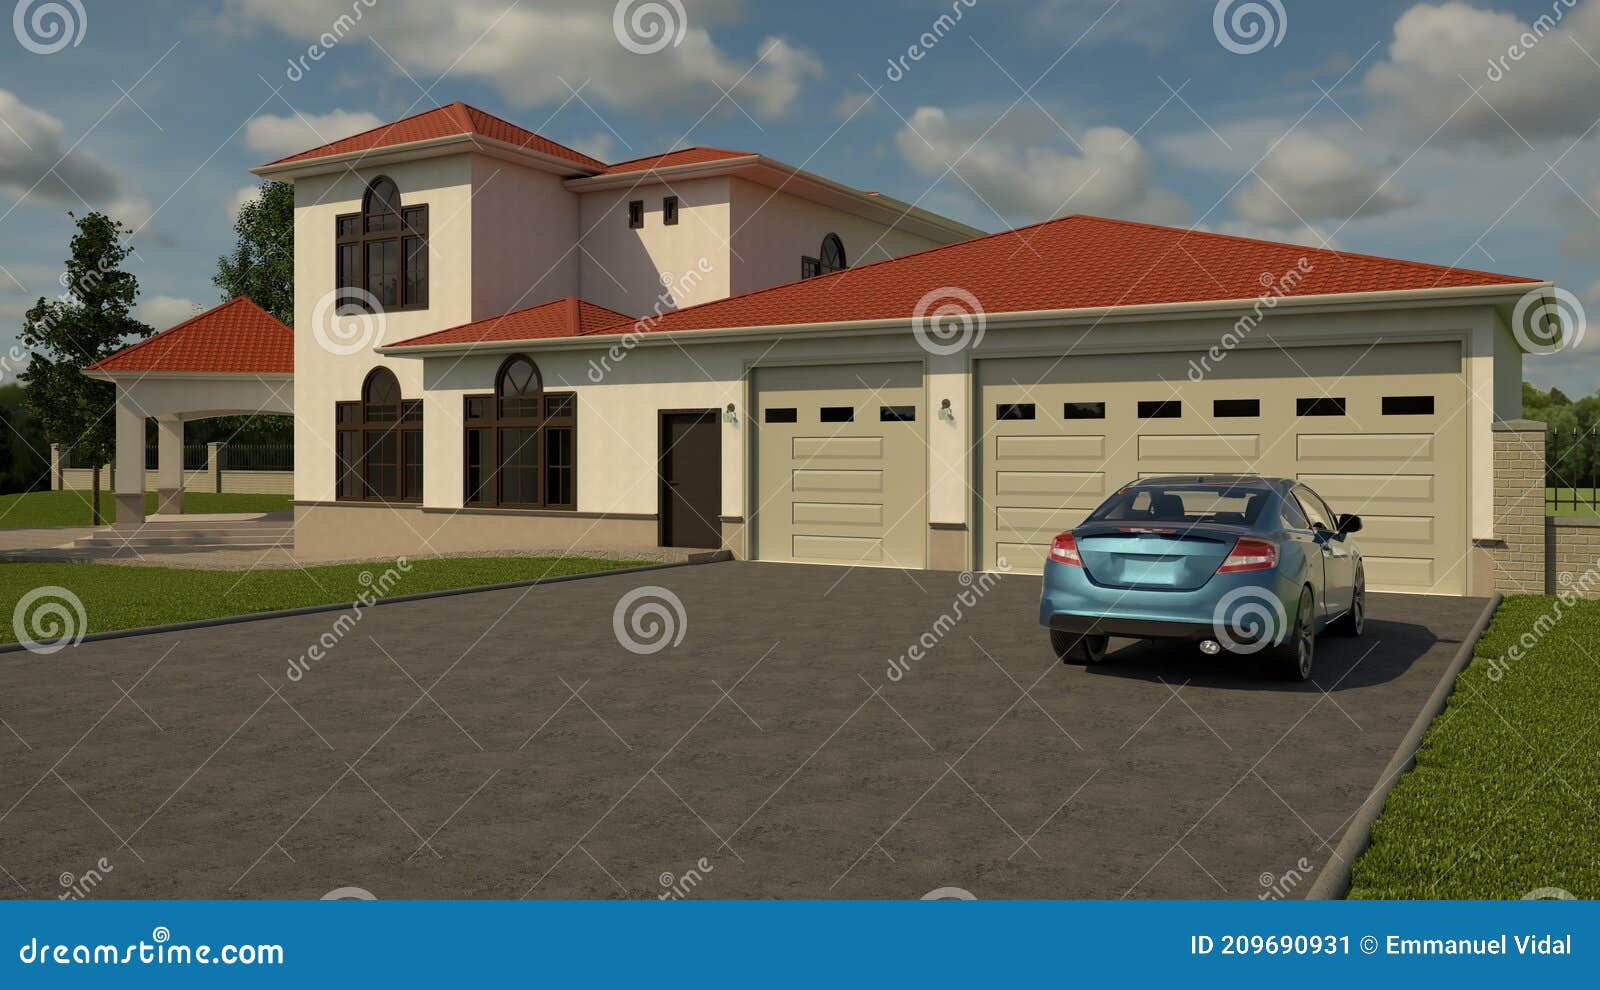 house mansion residential colonial villa 1 3d rendering 3d 